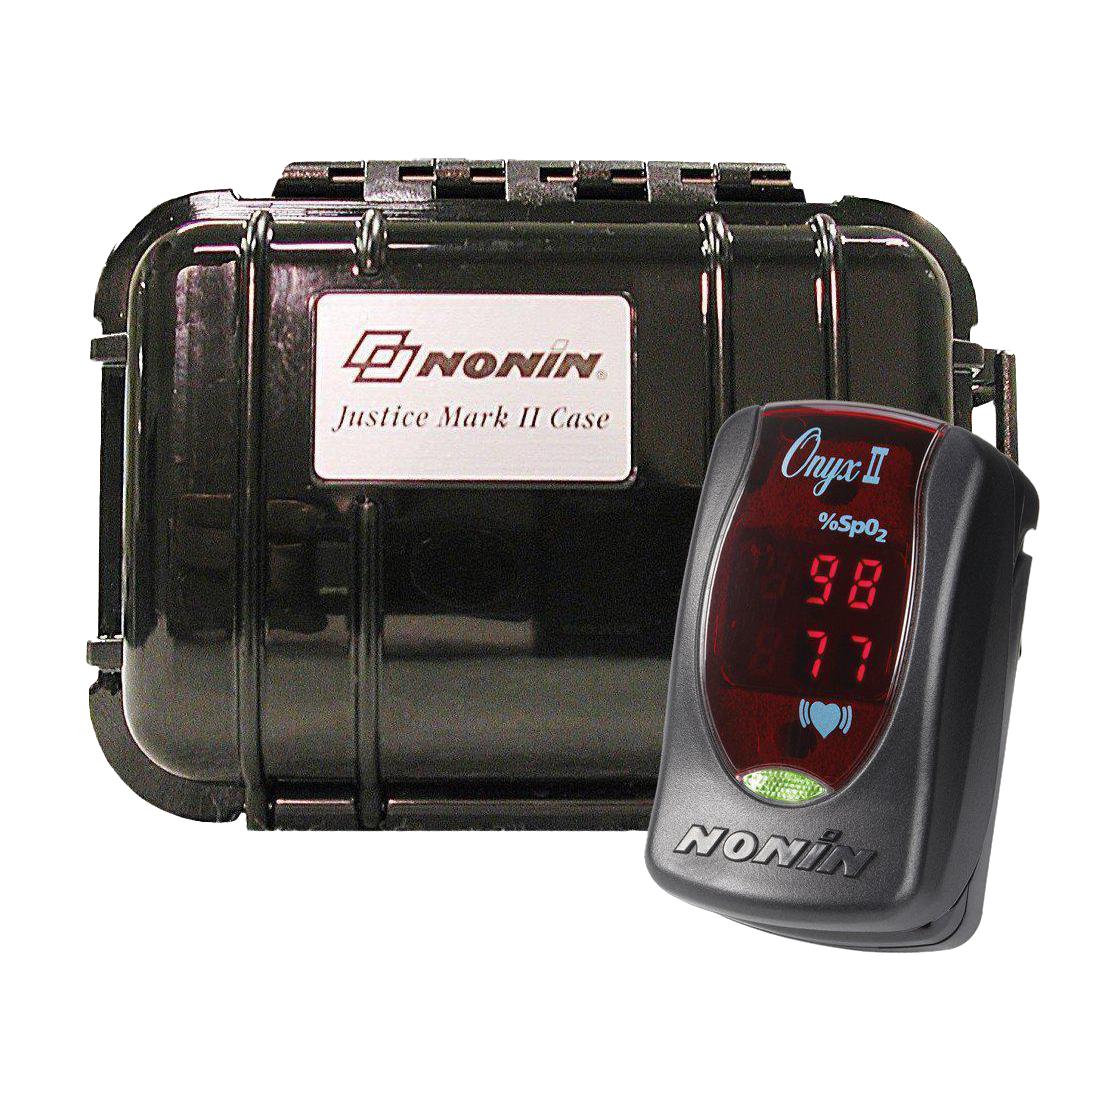 Onyx II 9550 Military Model Finger Pulse Oximeter, with Justice Mark II Case 6515-01-535-2728-Nonin-Integrated MedCraft